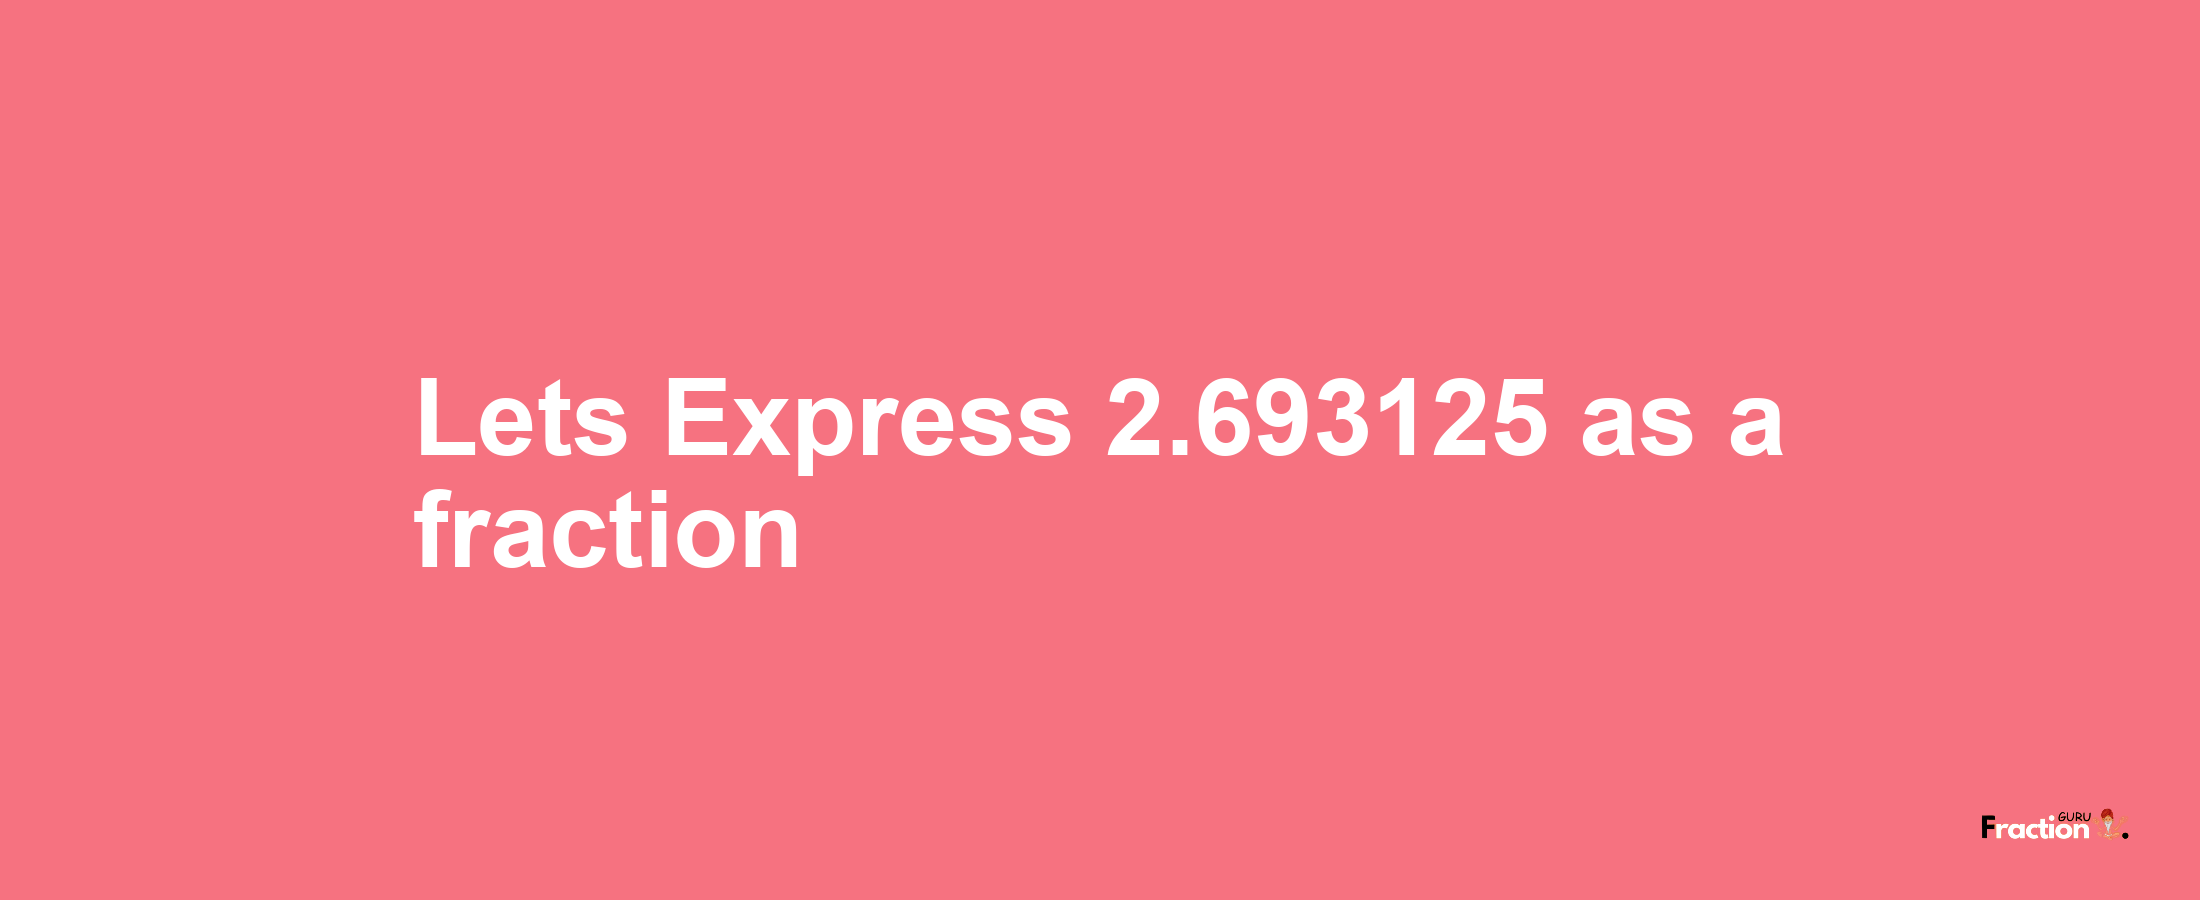 Lets Express 2.693125 as afraction